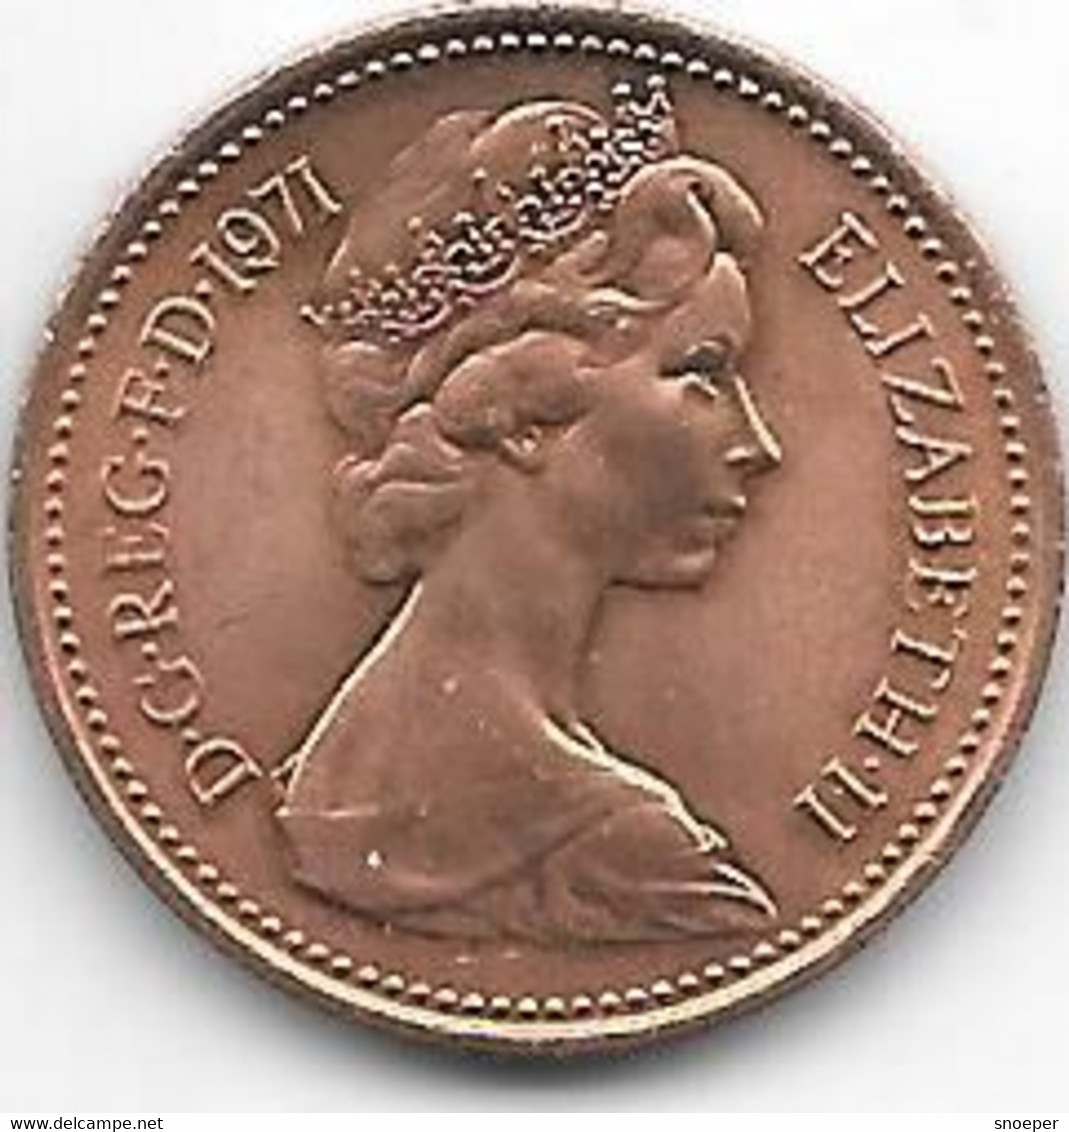 Great Britain 1 Penny 1971  Km 914  Unc/ms63 - 1 Penny & 1 New Penny